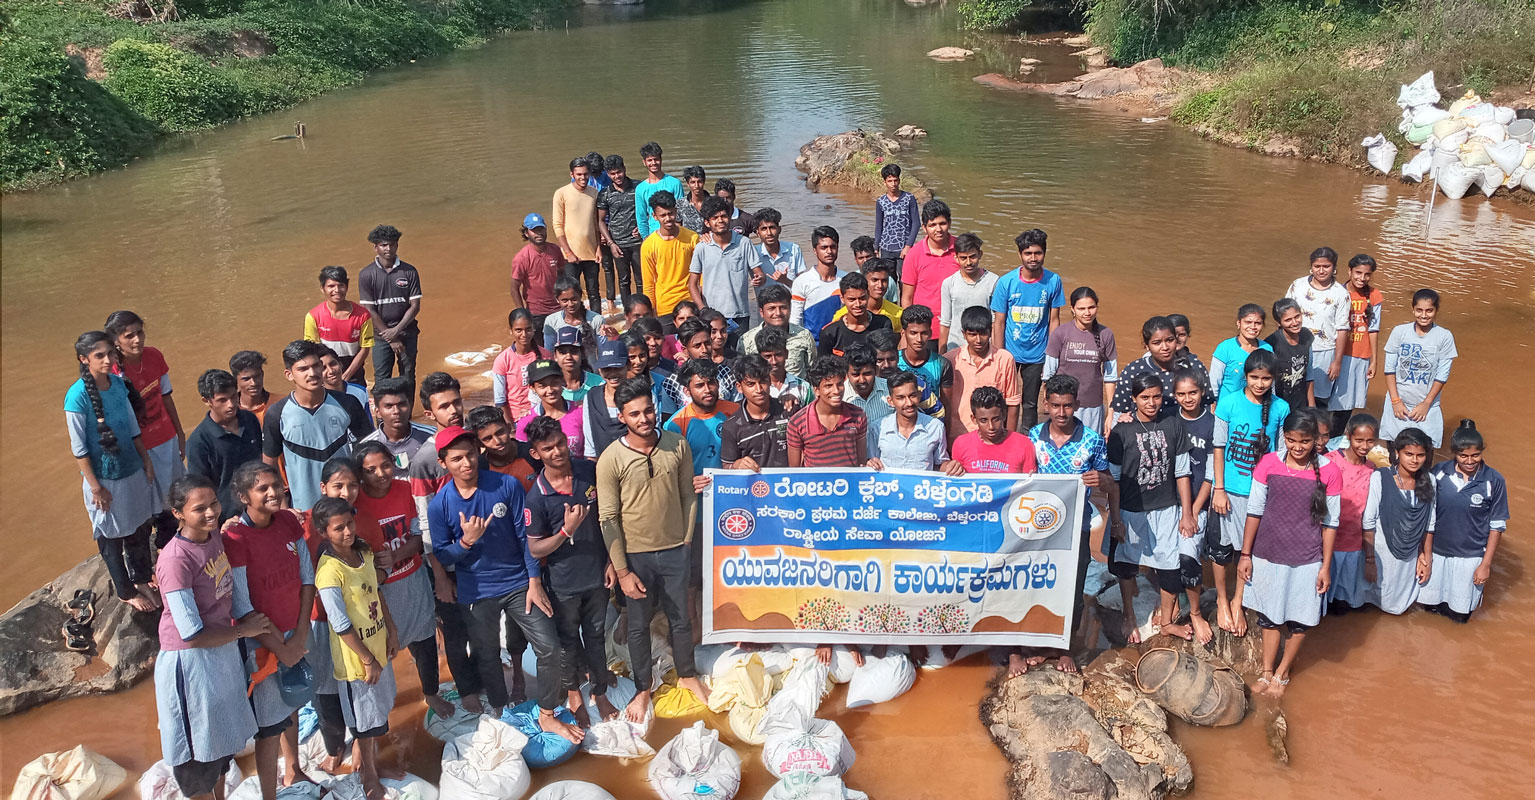 Rotaractors, Interactors and RCC members pitch in with Rotarians for building check dams in Belthangady.